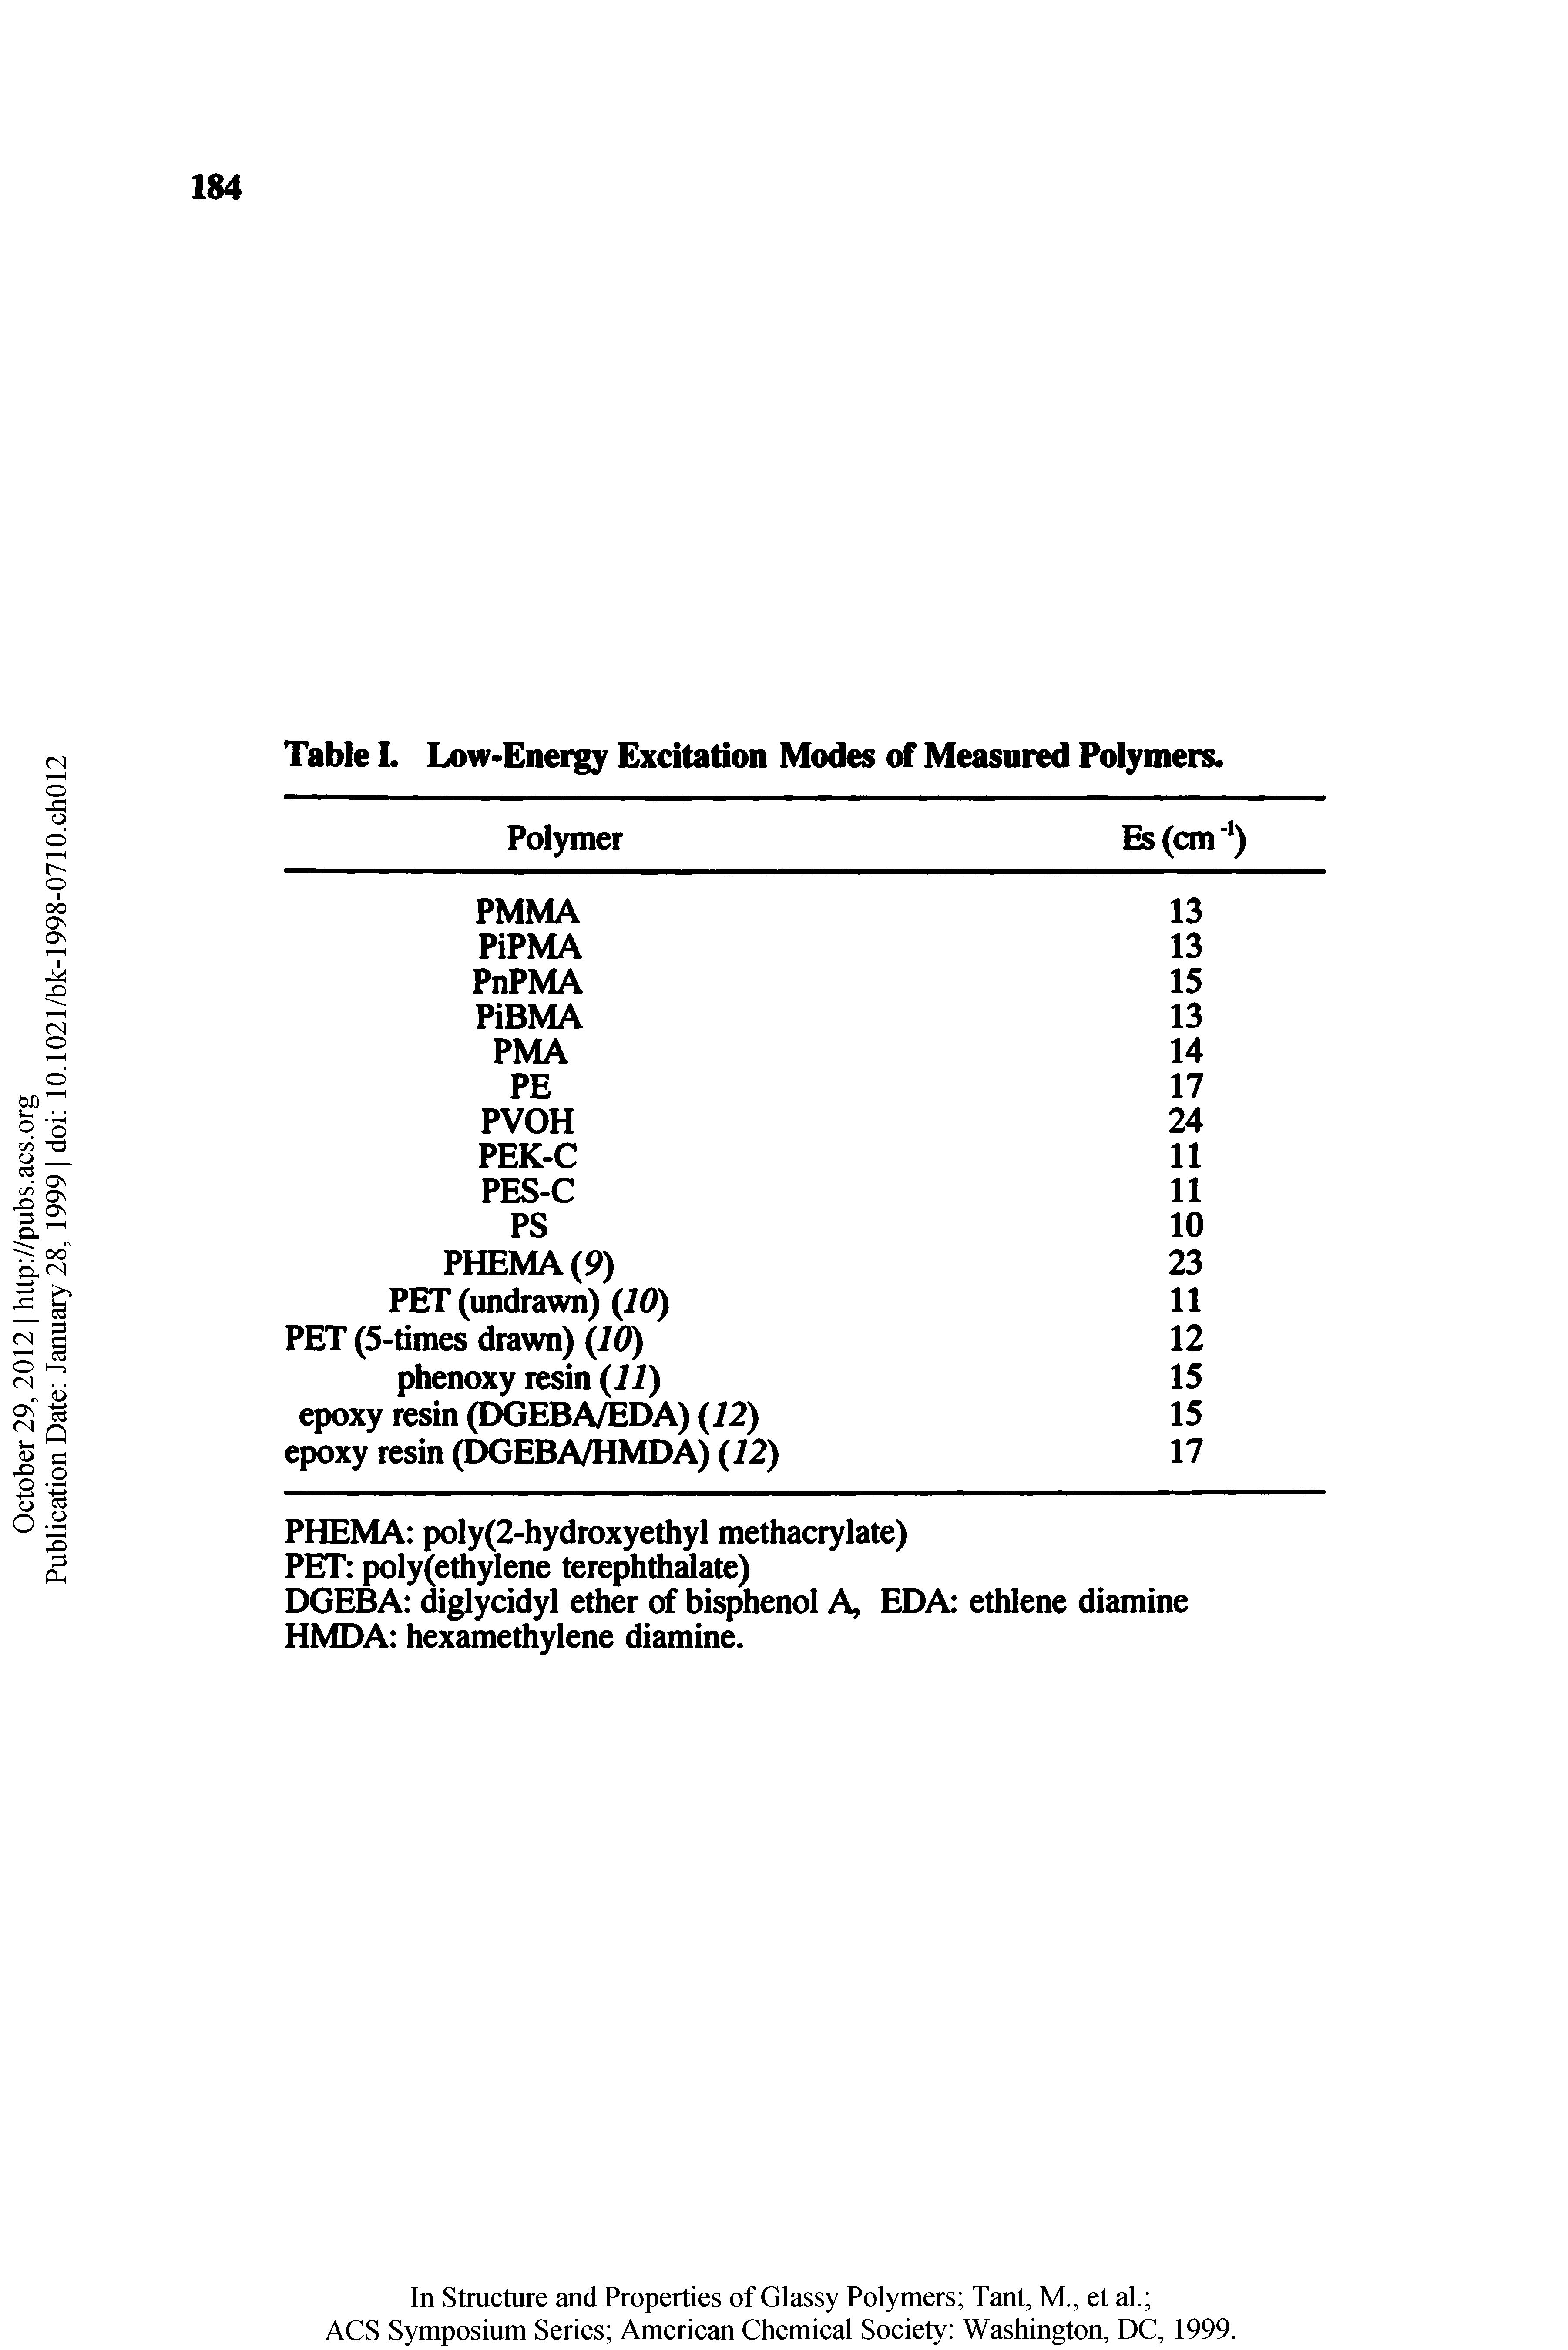 Table L Low-Enei gy Excitation Modes of Measured Polymers.